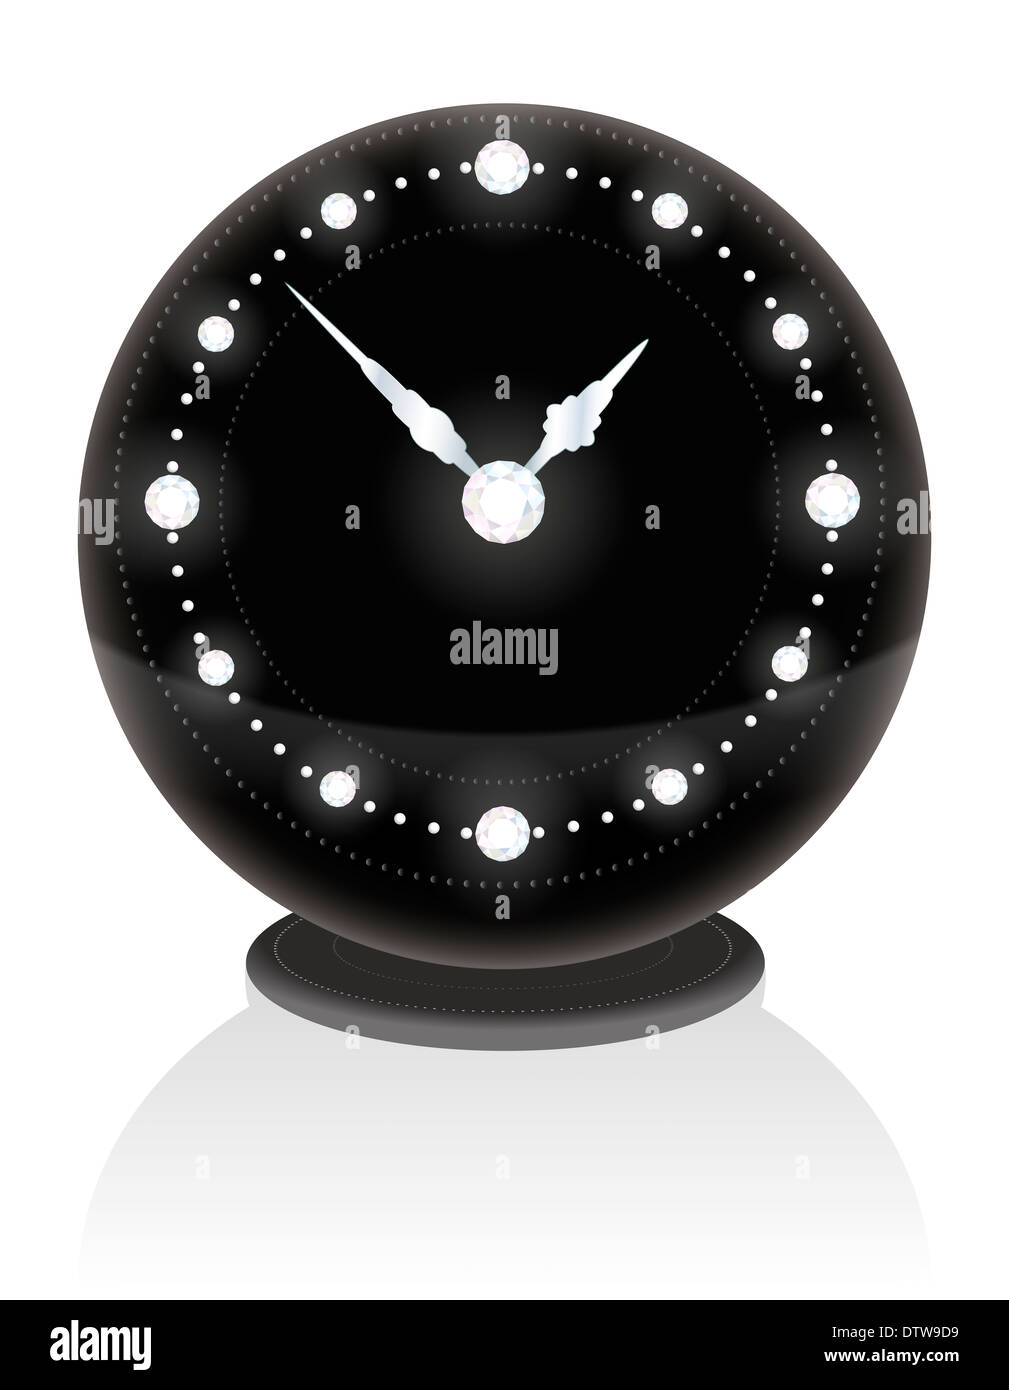 Noble black clock with diamonds on the face. Stock Photo